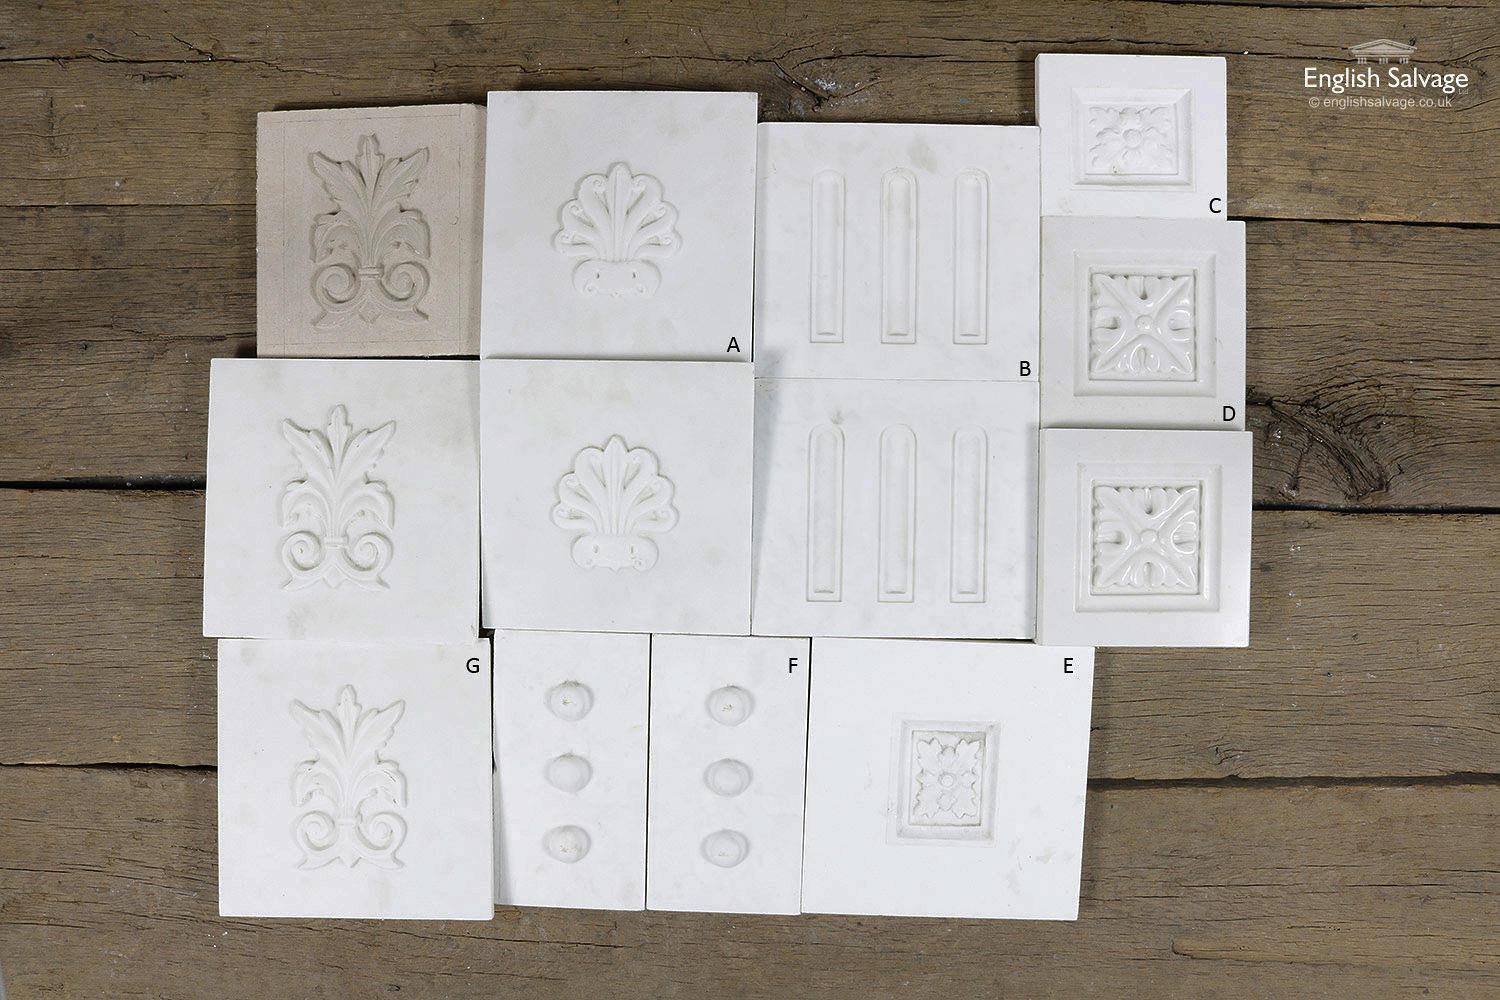 Salvaged marble plaques with carved motifs in several different designs.